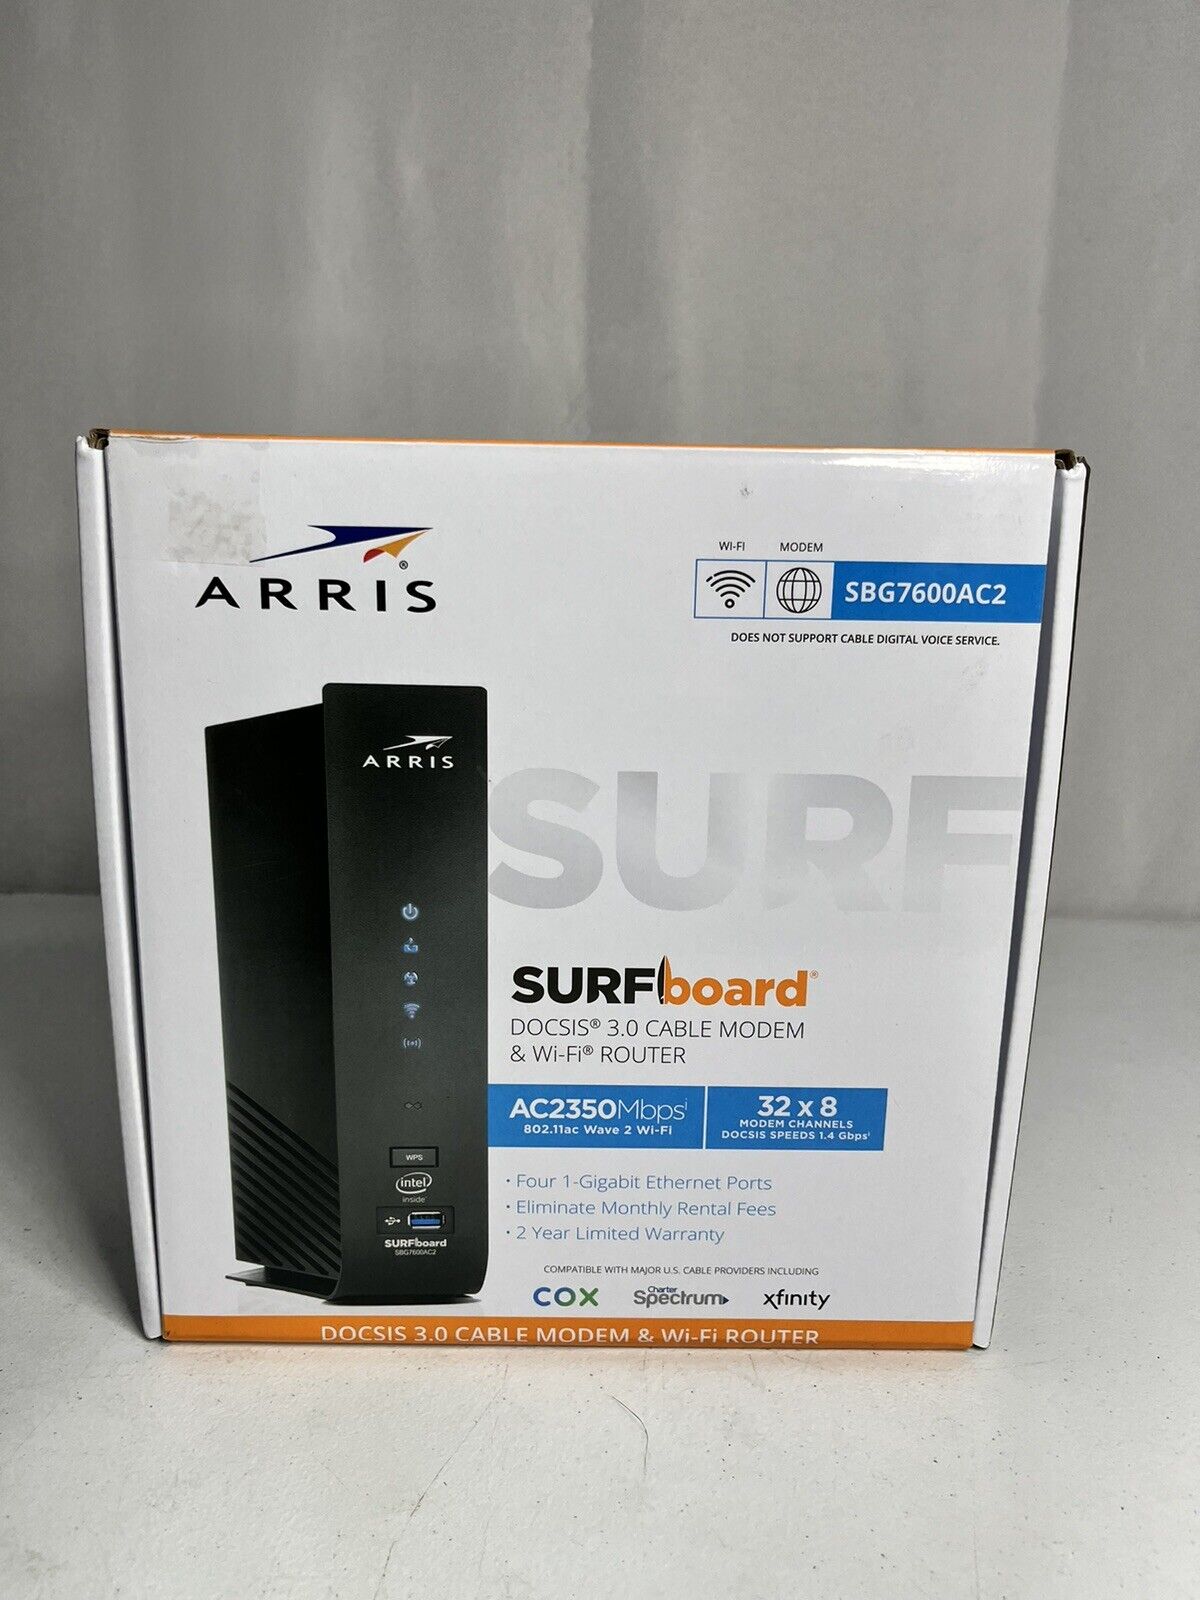 ARRIS SURFboard SBG7600AC2 DOCSIS 3.0 Cable Modem  DualBand WiFi Router